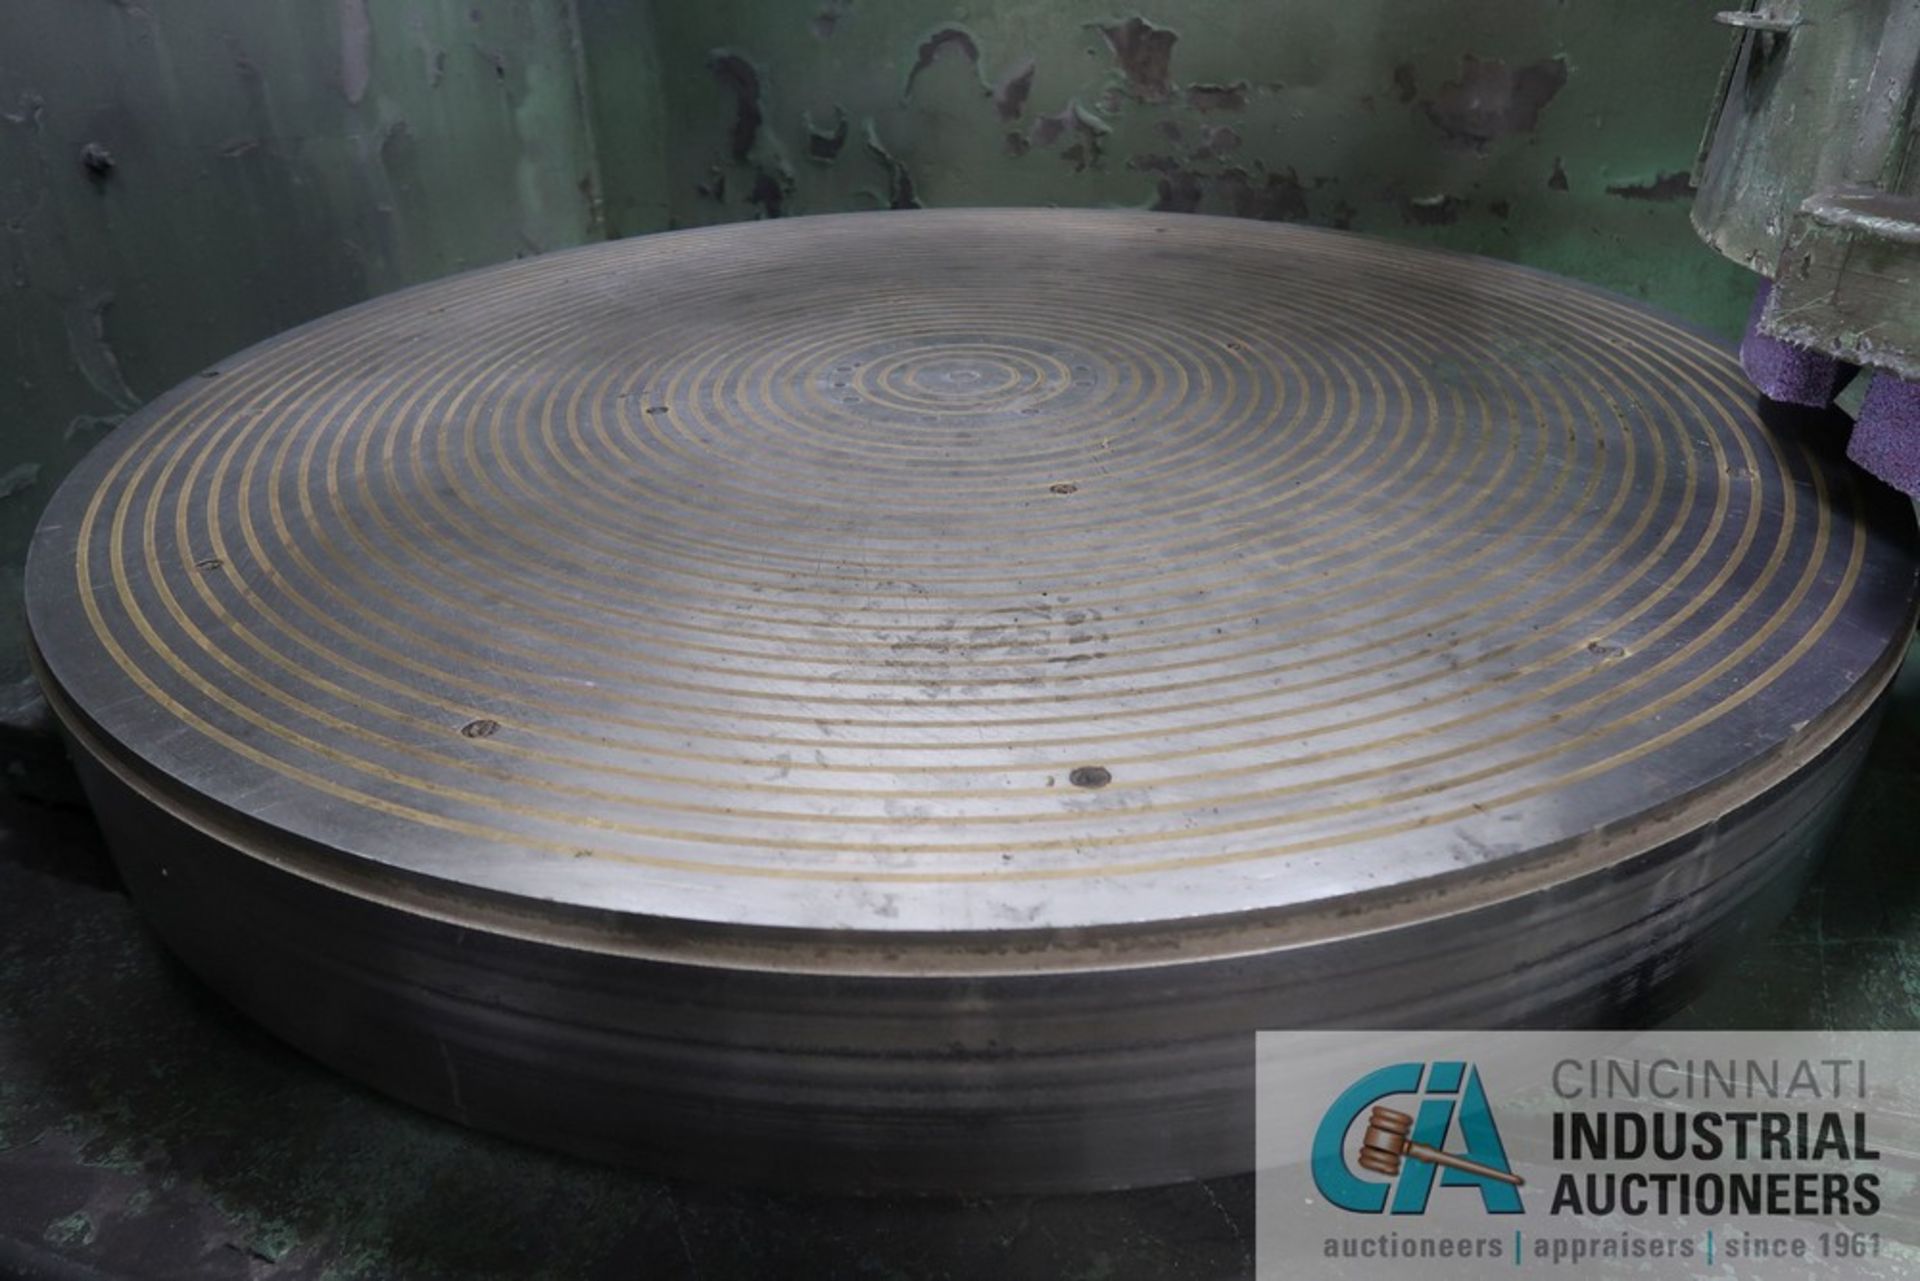 48" DIAMETER MATTISON ROTARY TABLE SURFACE GRINDER; S/N 24-799, 75 HP MOTOR, COOLANT FILTRATION, - Image 3 of 16